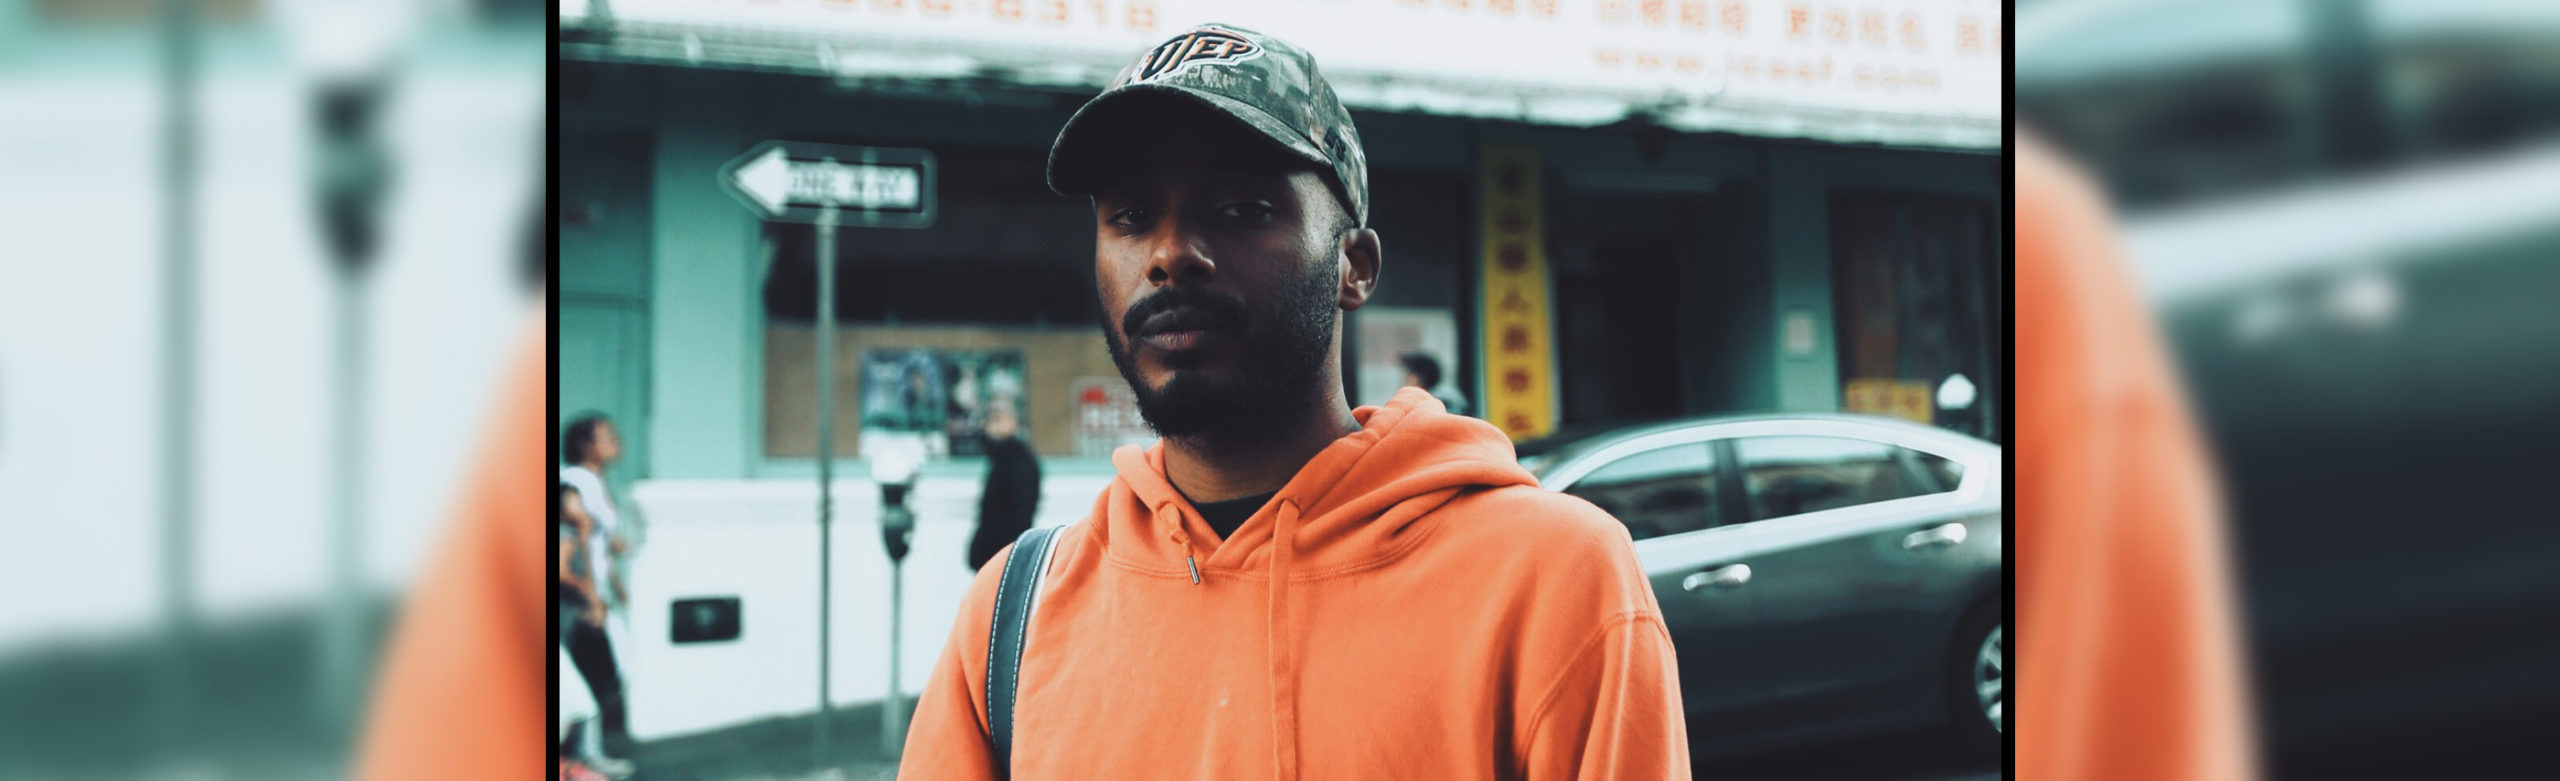 Bay Area Rapper Caleborate to Join Skizzy Mars in Missoula (Support Spotlight) Image